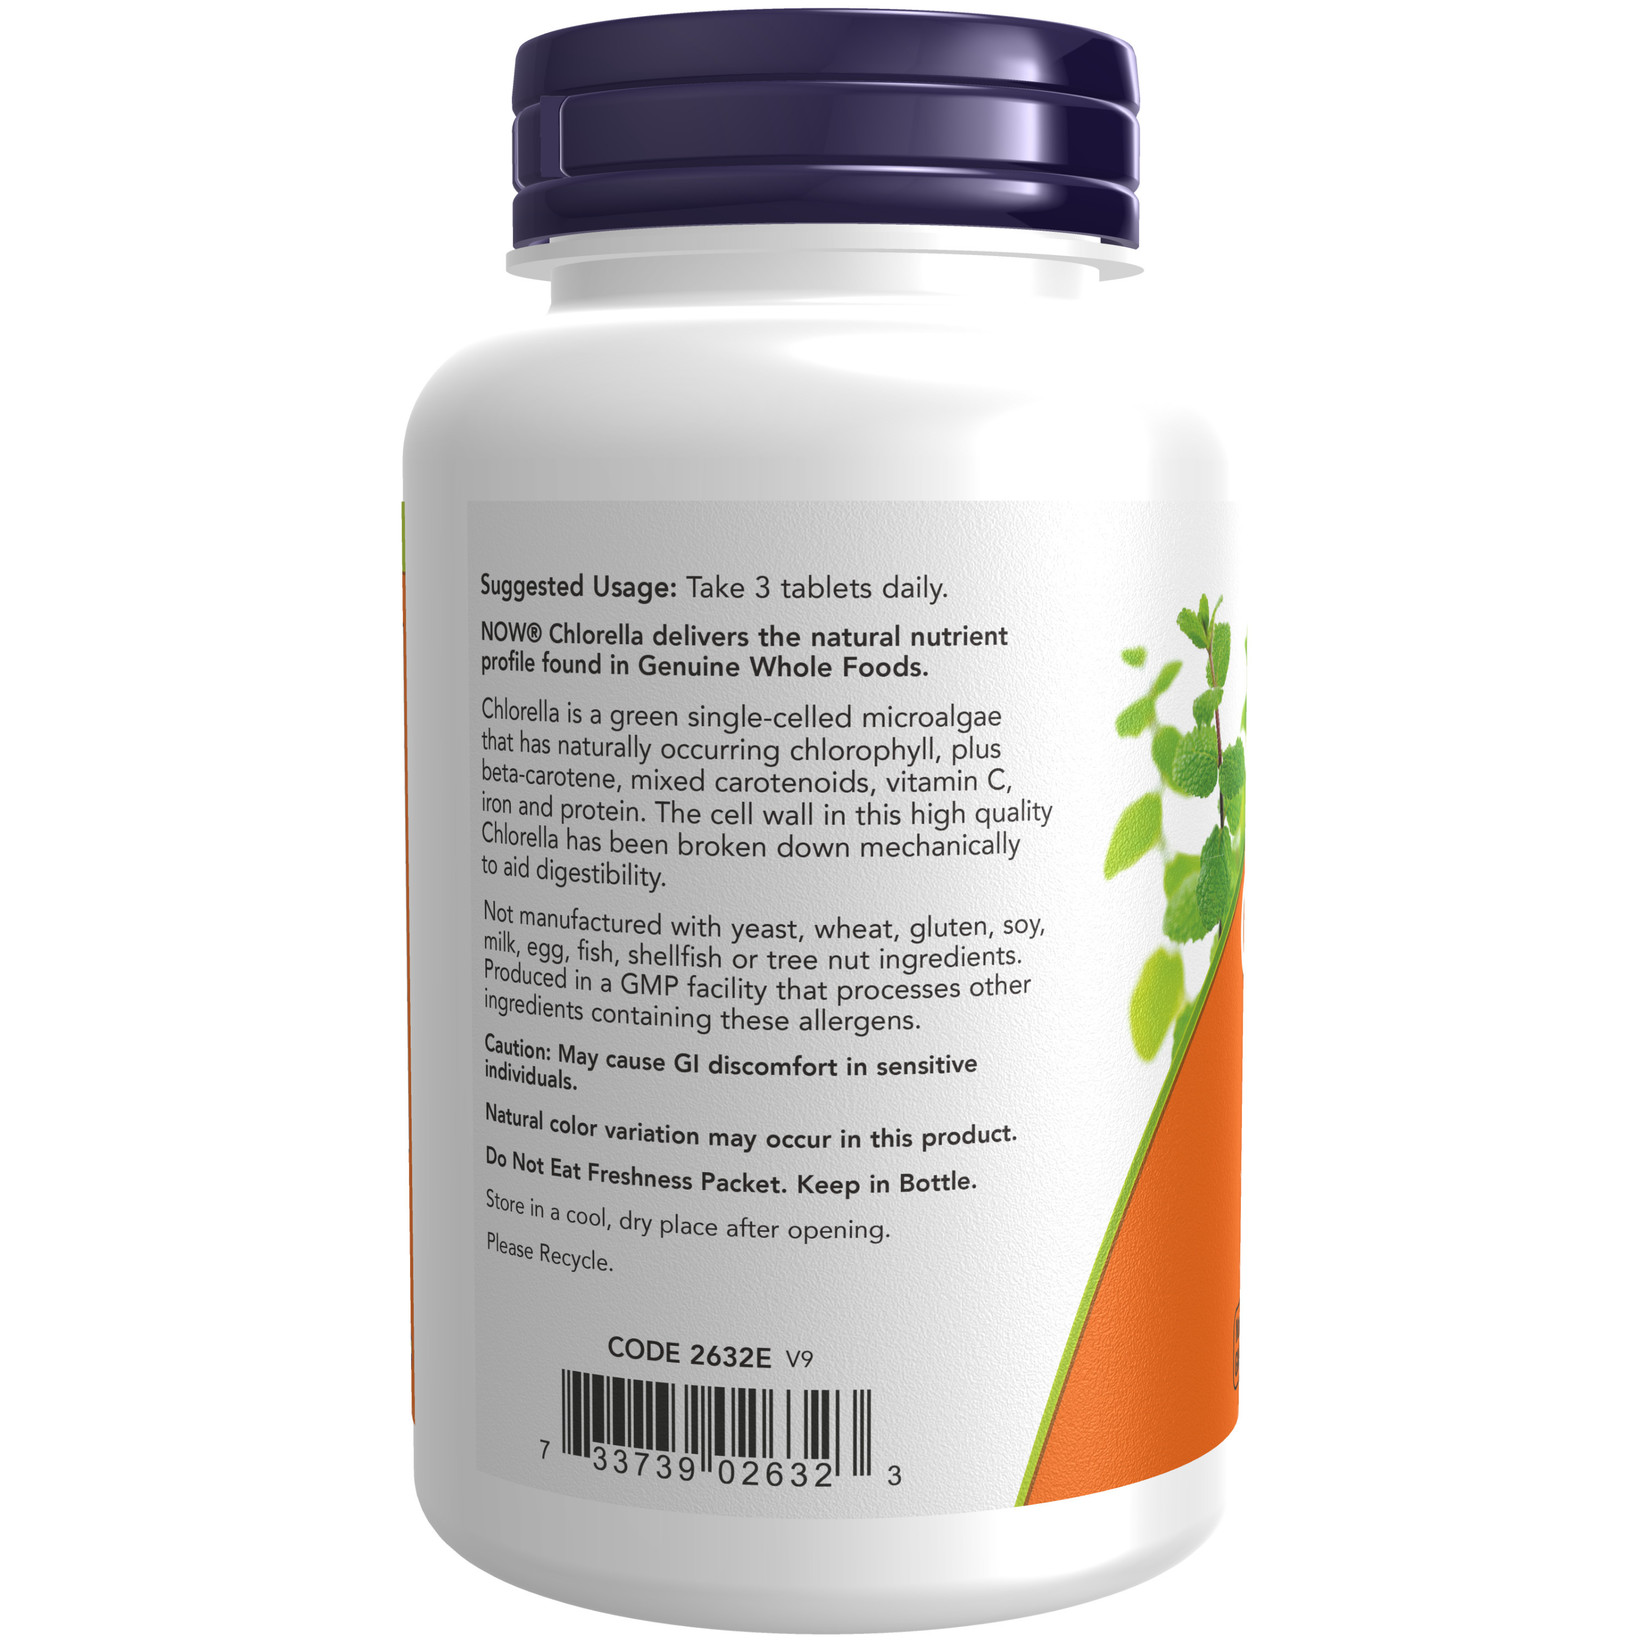 Now Now - Chlorella 1000mg - 120 Tablets